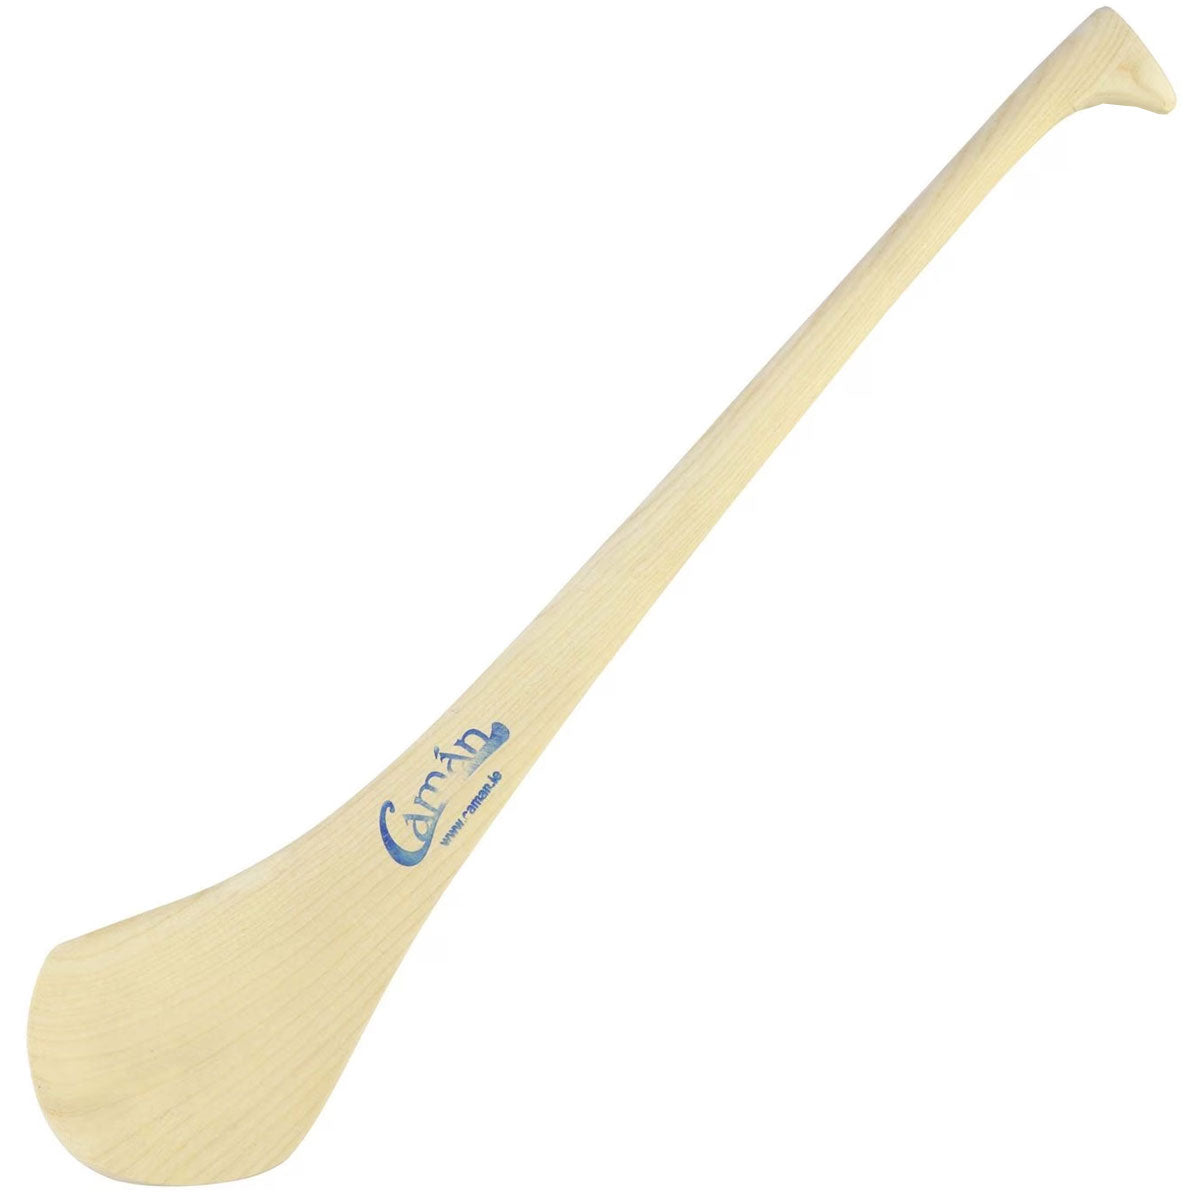 Caman Hurling Stick size 22 (Inches)